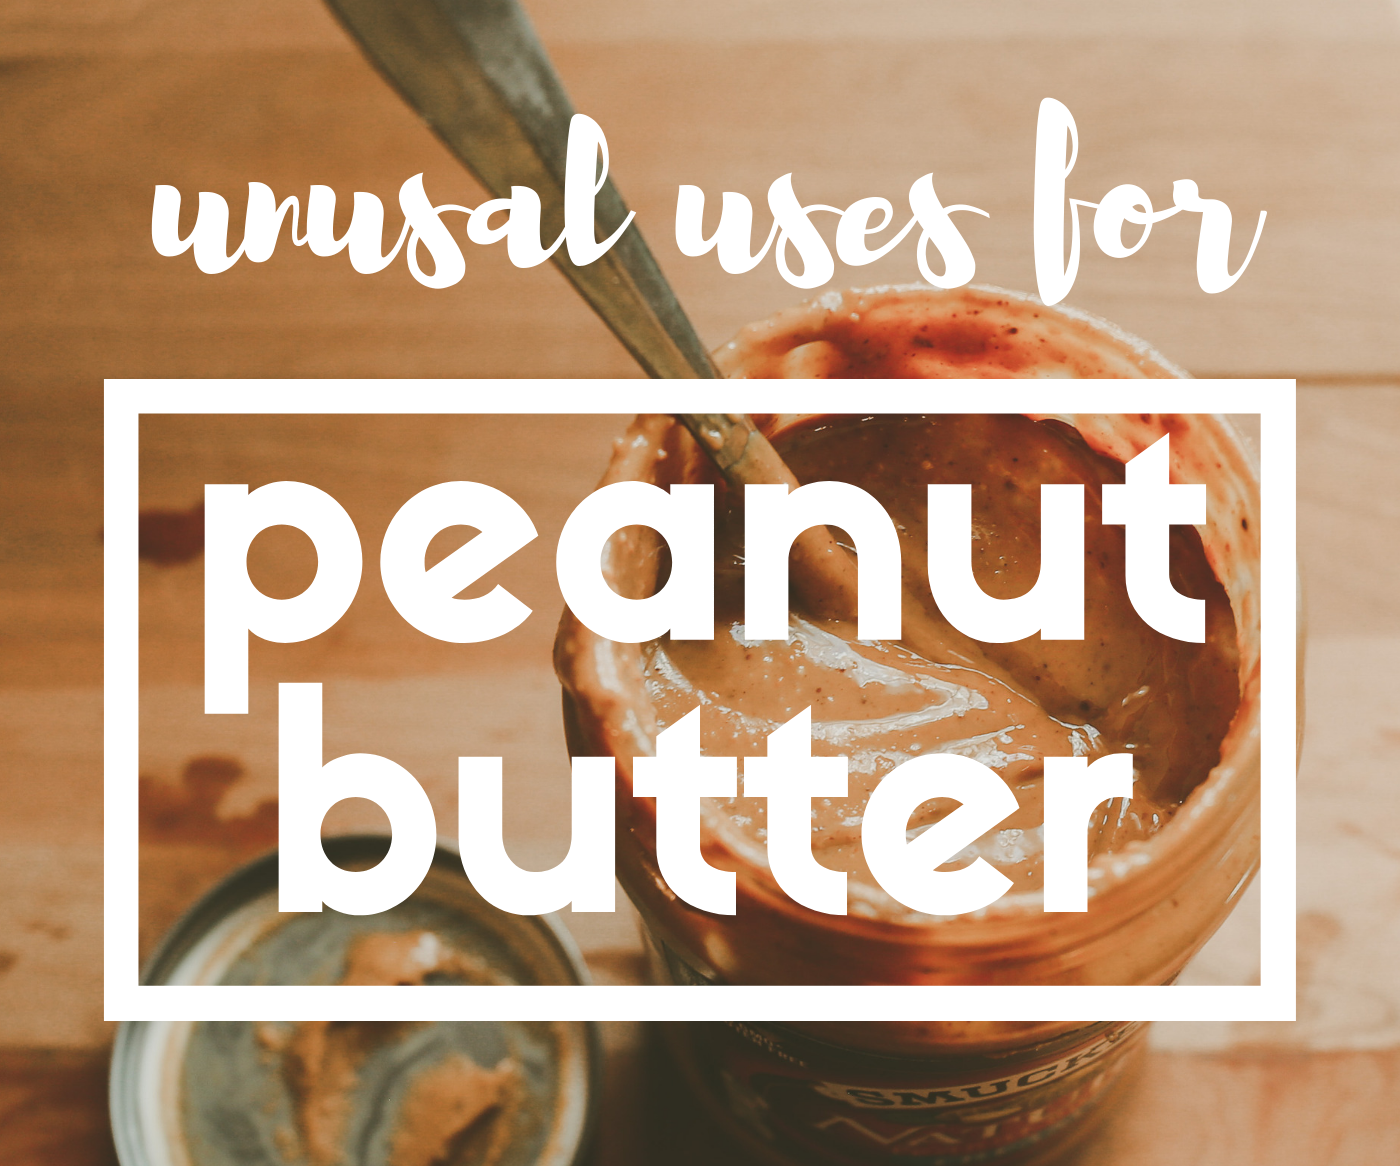 Unusual Uses for Peanut Butter